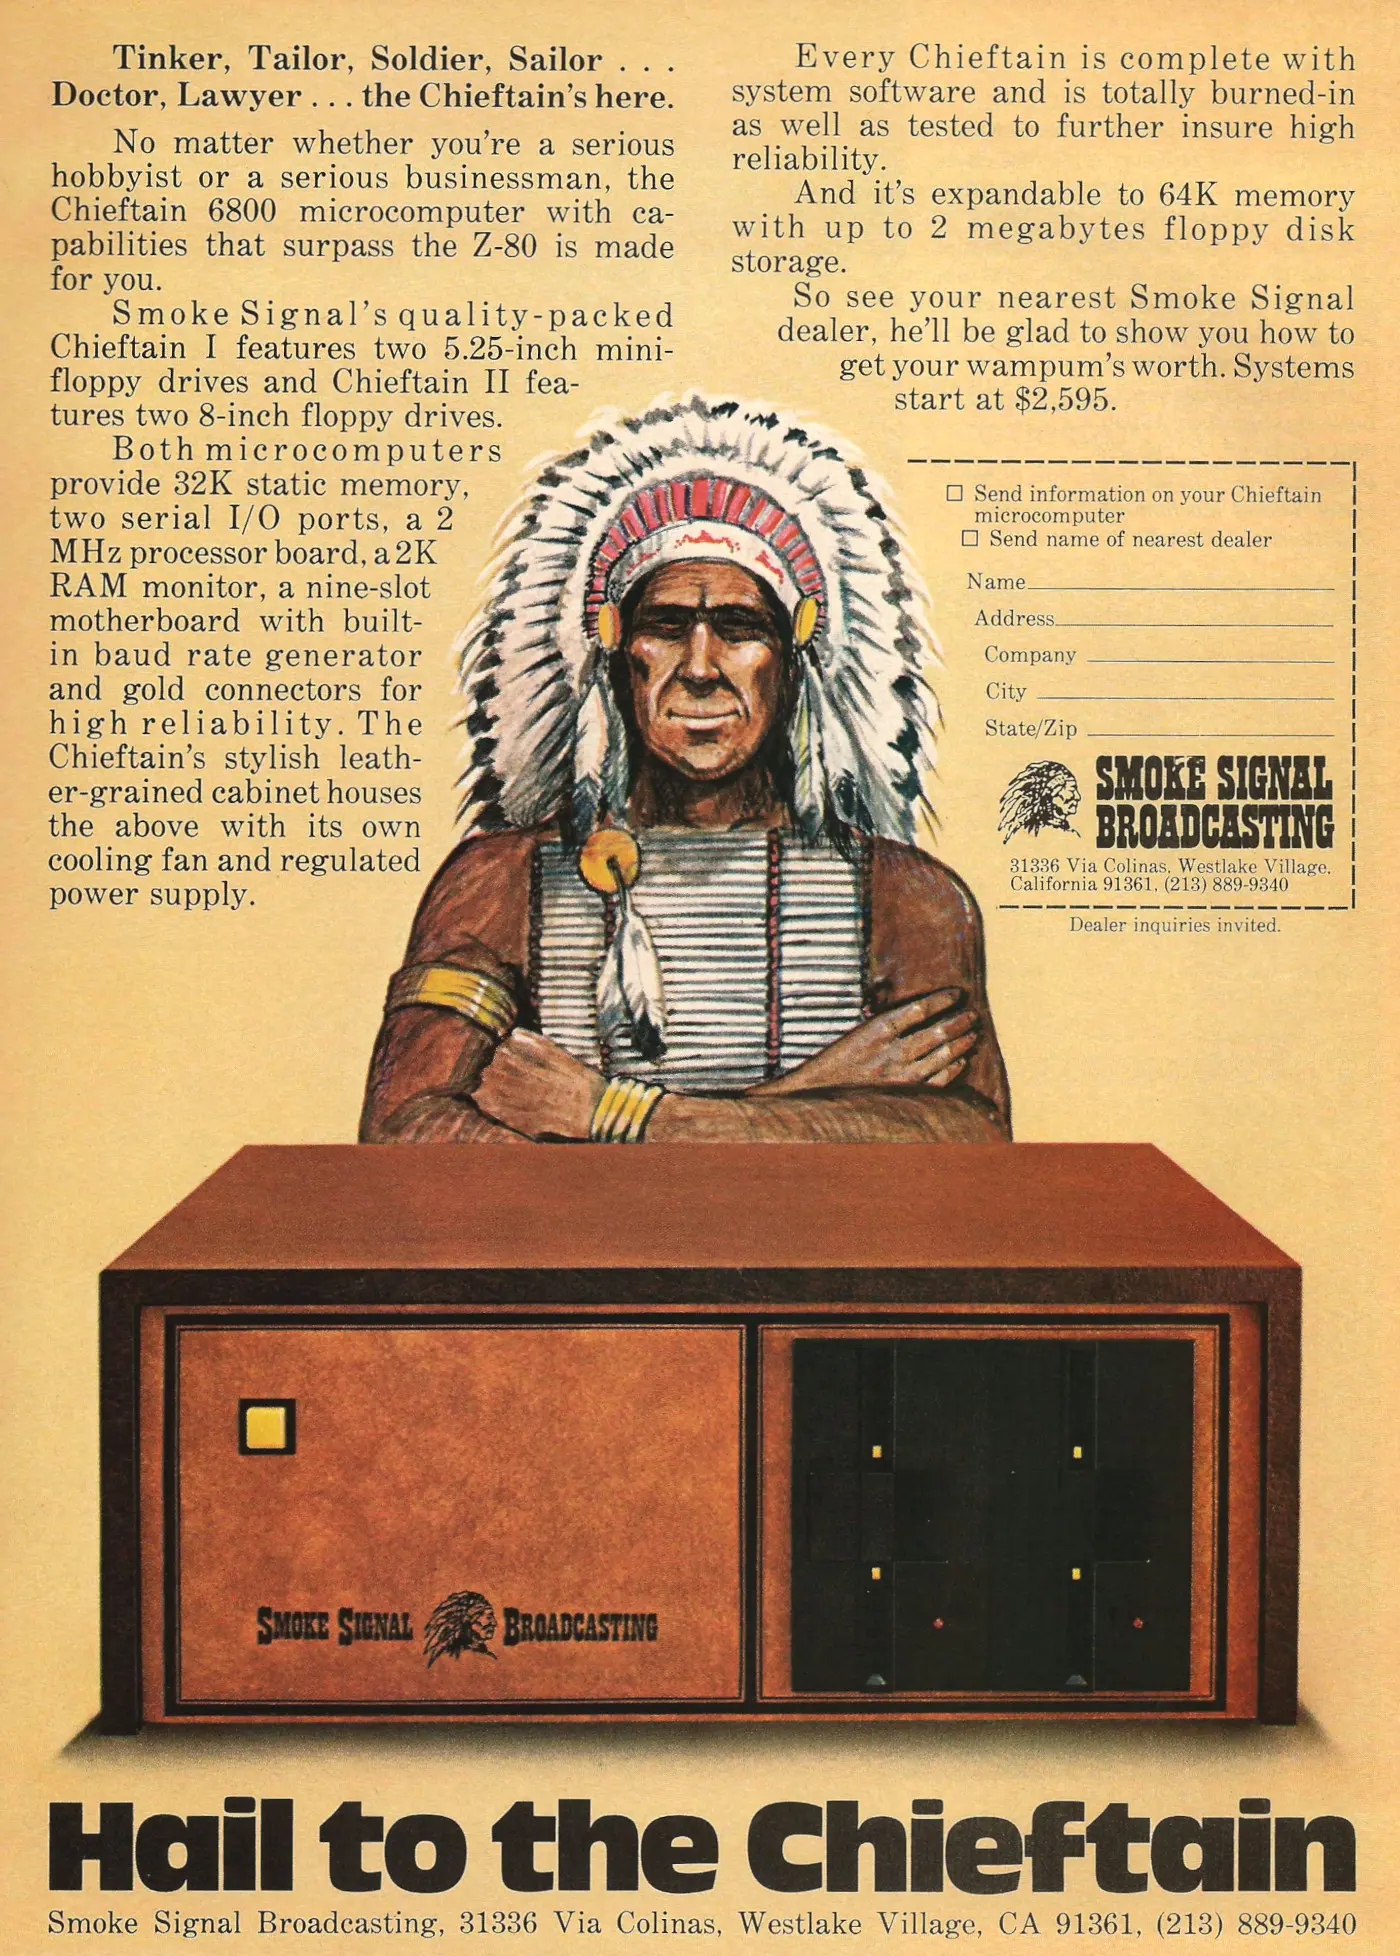 Smoke Signal Advert: Smoke Signal Broadcasting: Hail to the Chieftain, from Byte - The Small Systems Journal, December 1978